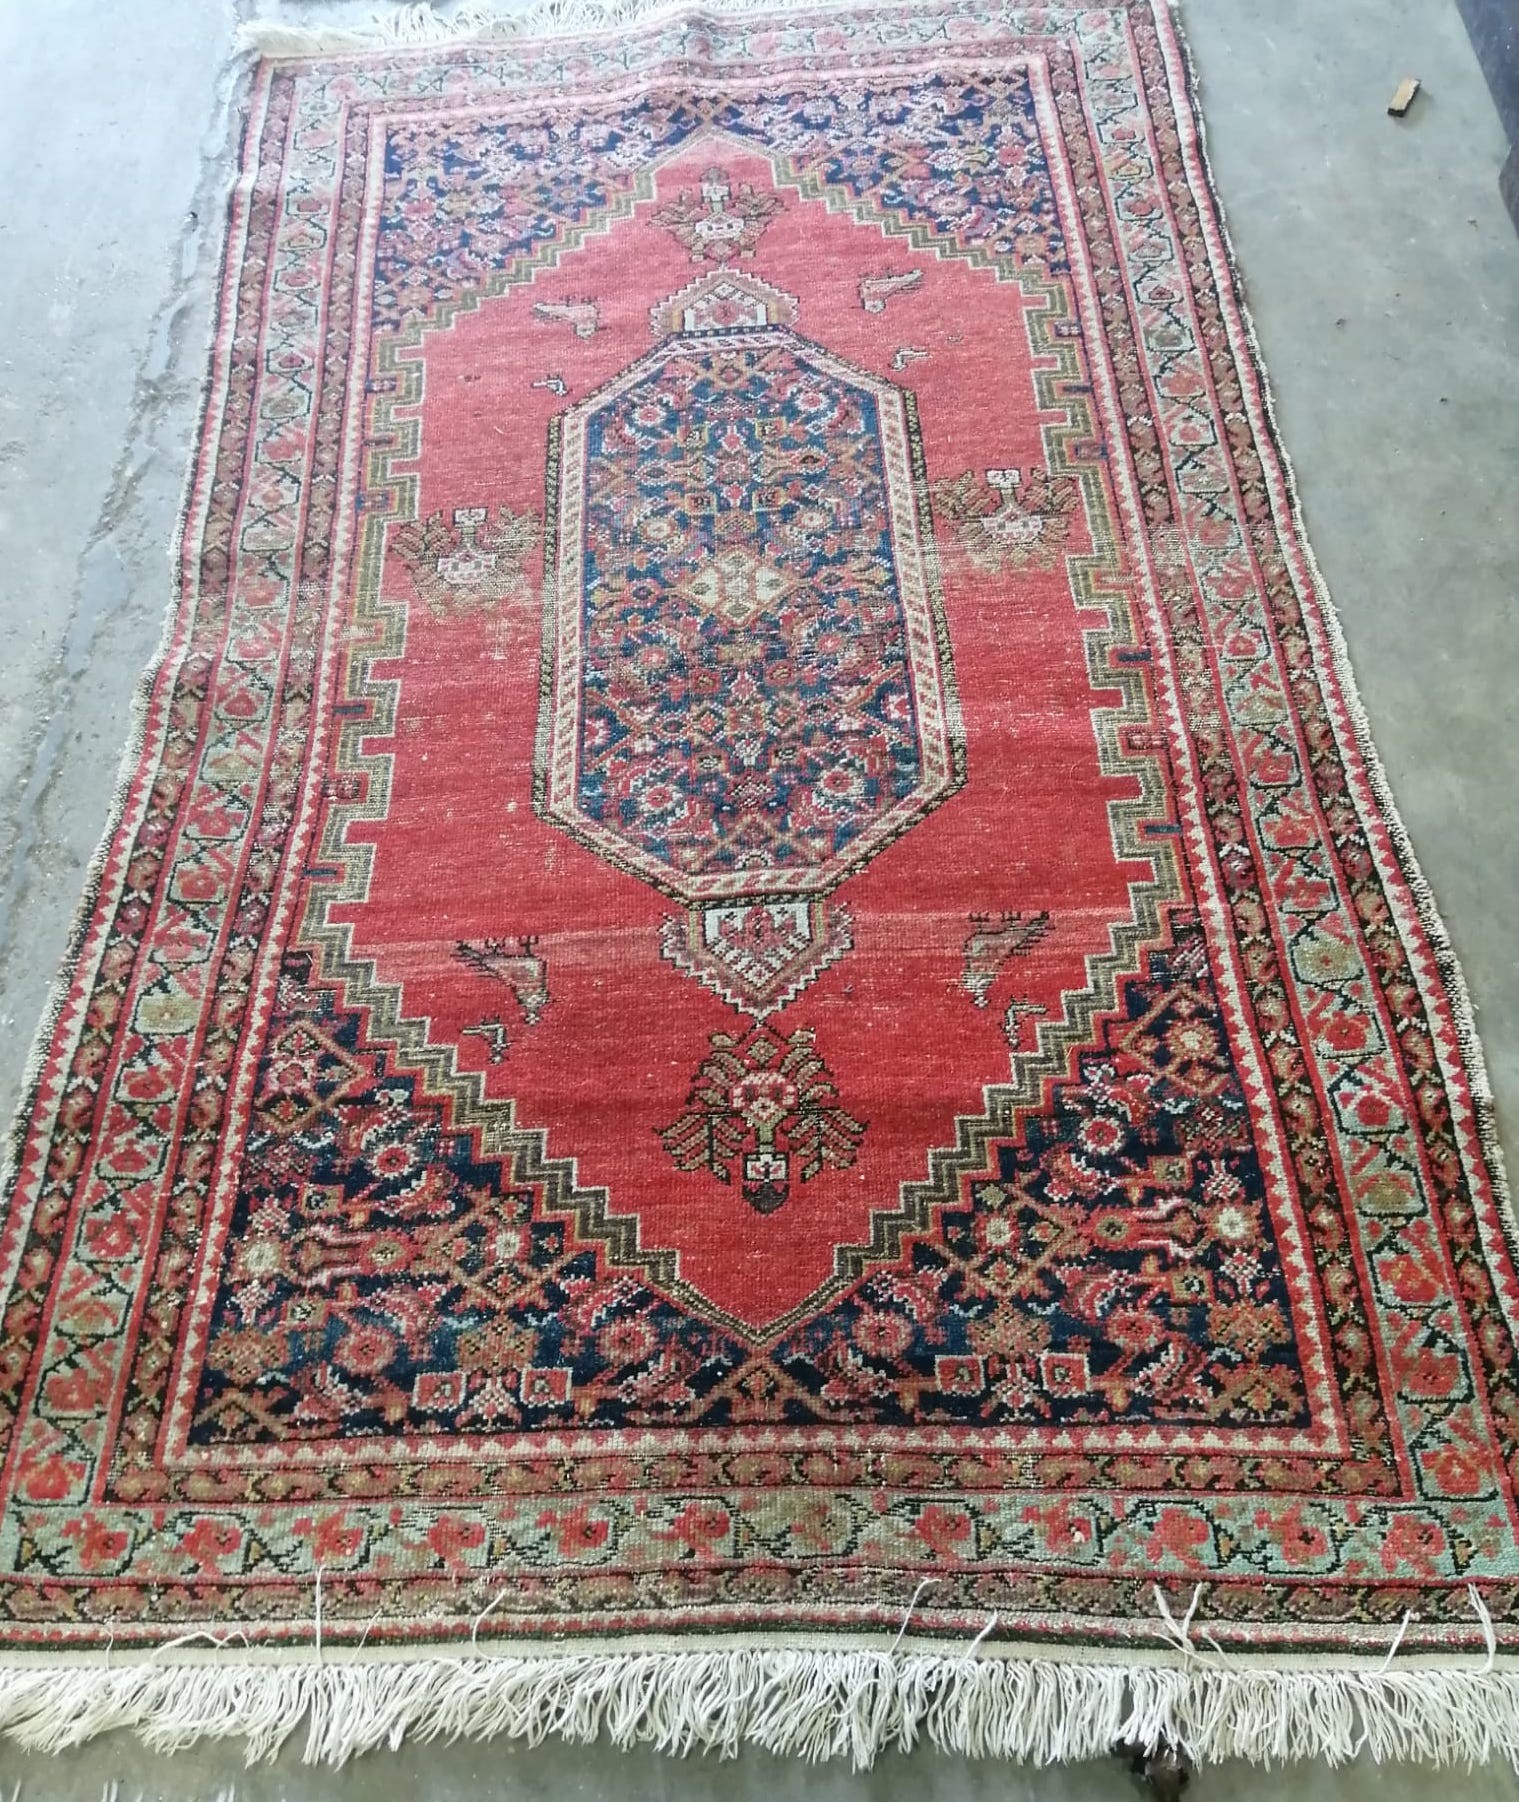 Two antique North West Persian red ground rugs, (worn) larger 183 x 125cm *Please note the sale commences at 9am.                                                                                                           